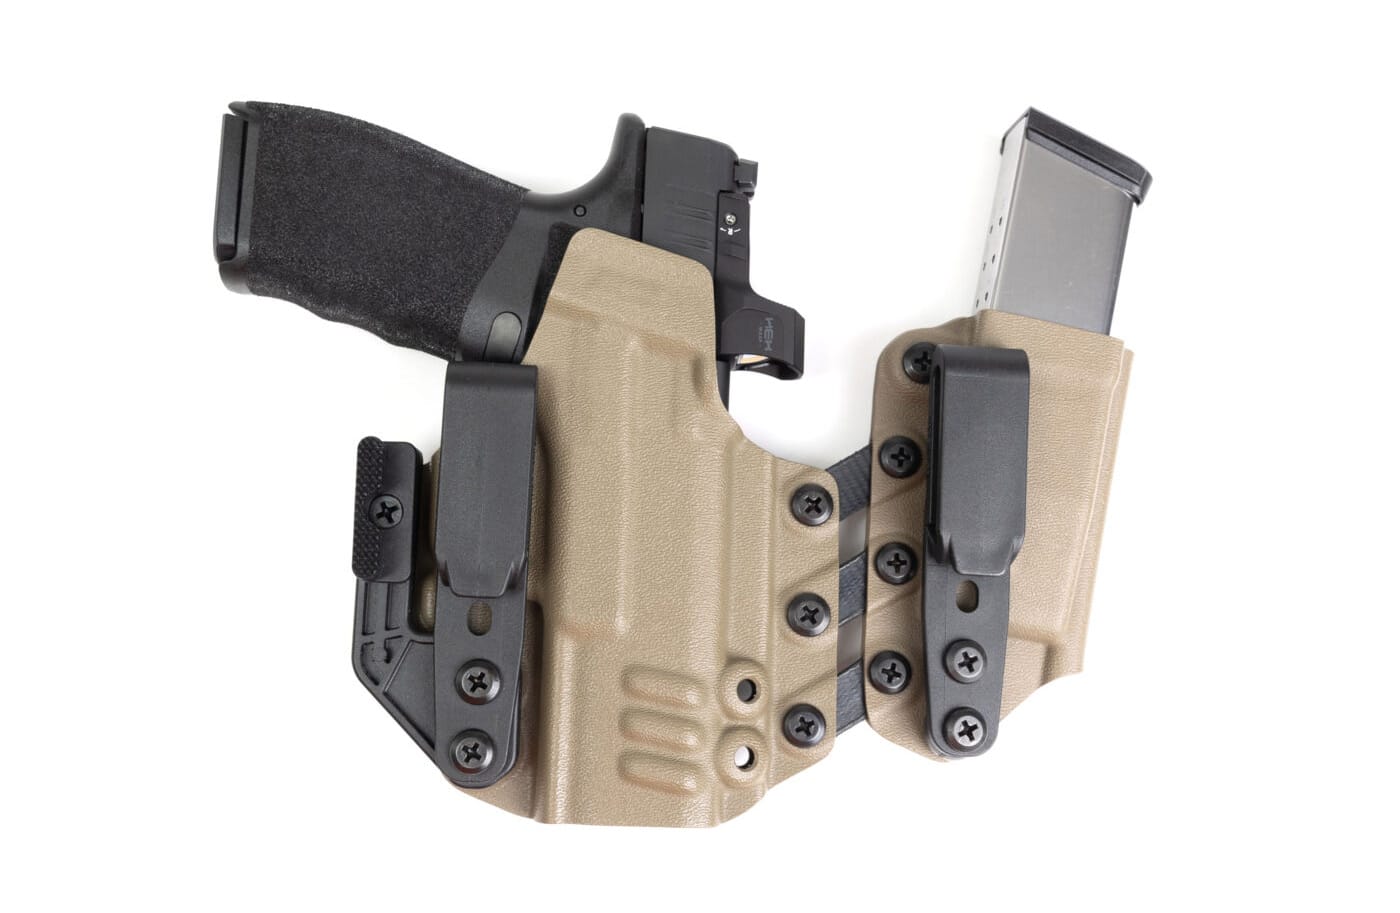  POLE.CRAFT Holster Claw Kit for IWB Kydex Holster & Tuckable  Gun Holsters - Inside Waistband Concealed Carry Holster Wing Modwing -  Adjustable Depth & Angle - Left & Right Hand 